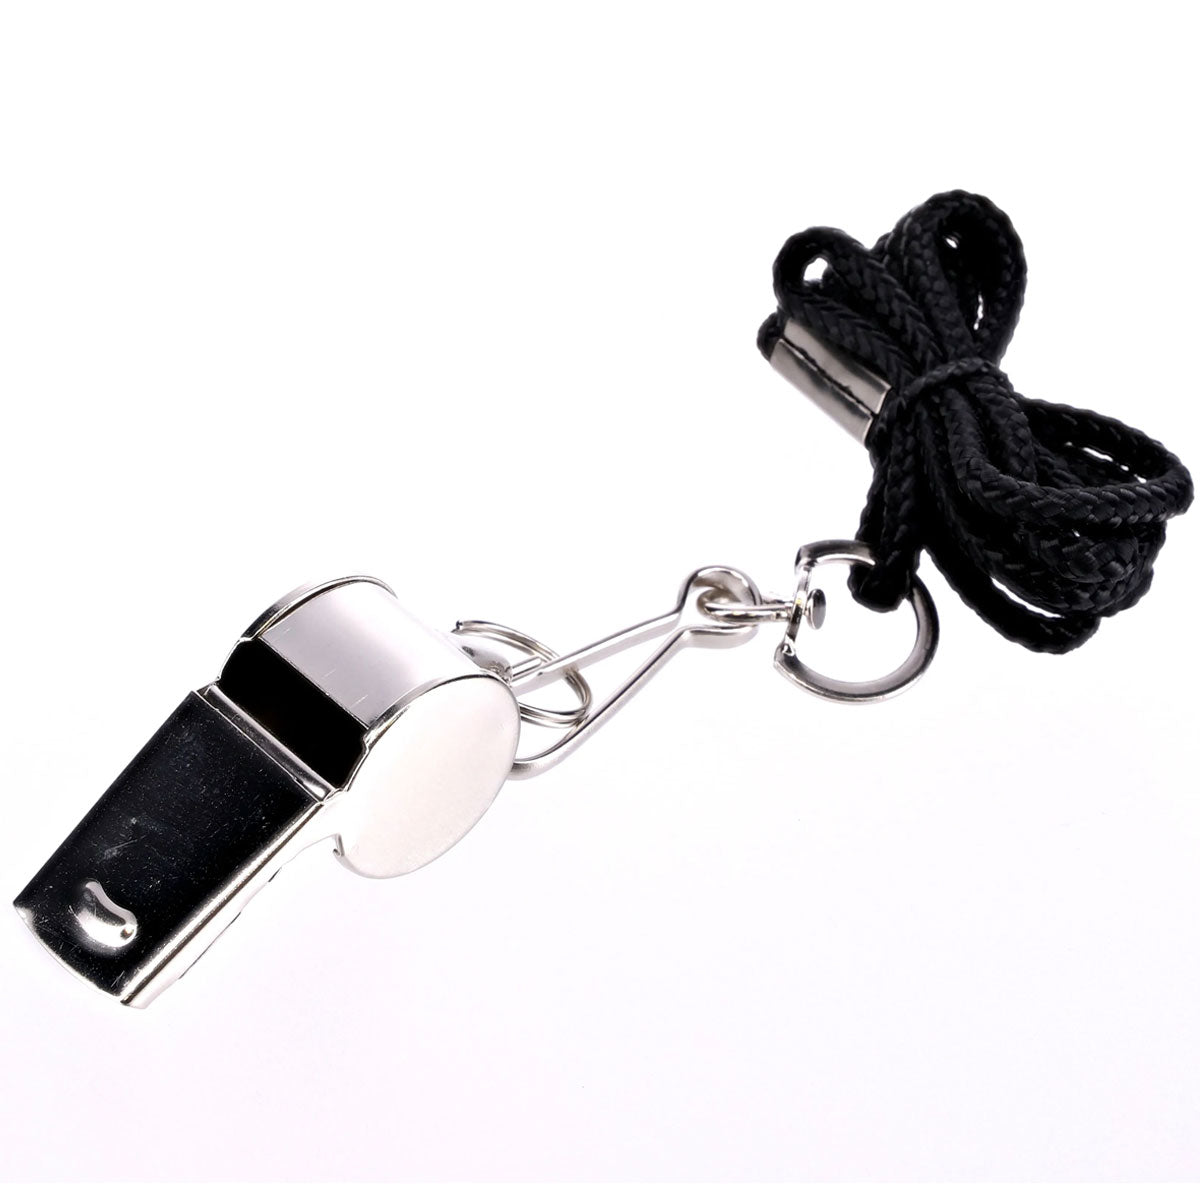 Precision Training Metal Whistle with Lanyard